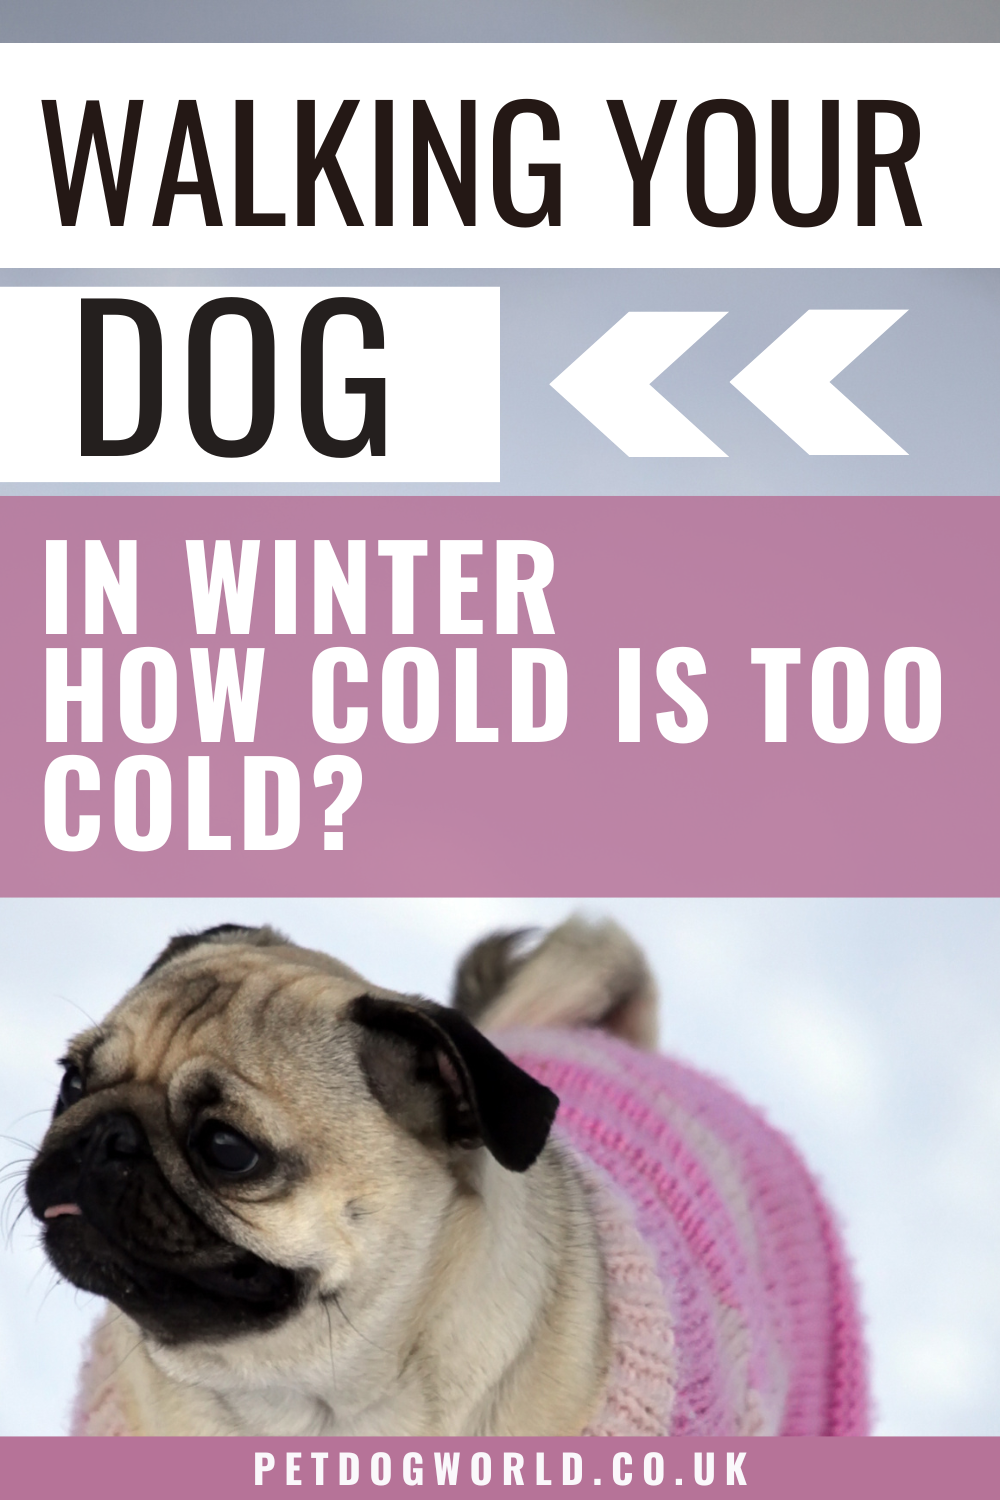 Find out when it's too cold for your dog's winter walk! Learn signs of hypothermia, get tips for safe outings, and discover recommended dog jackets. 